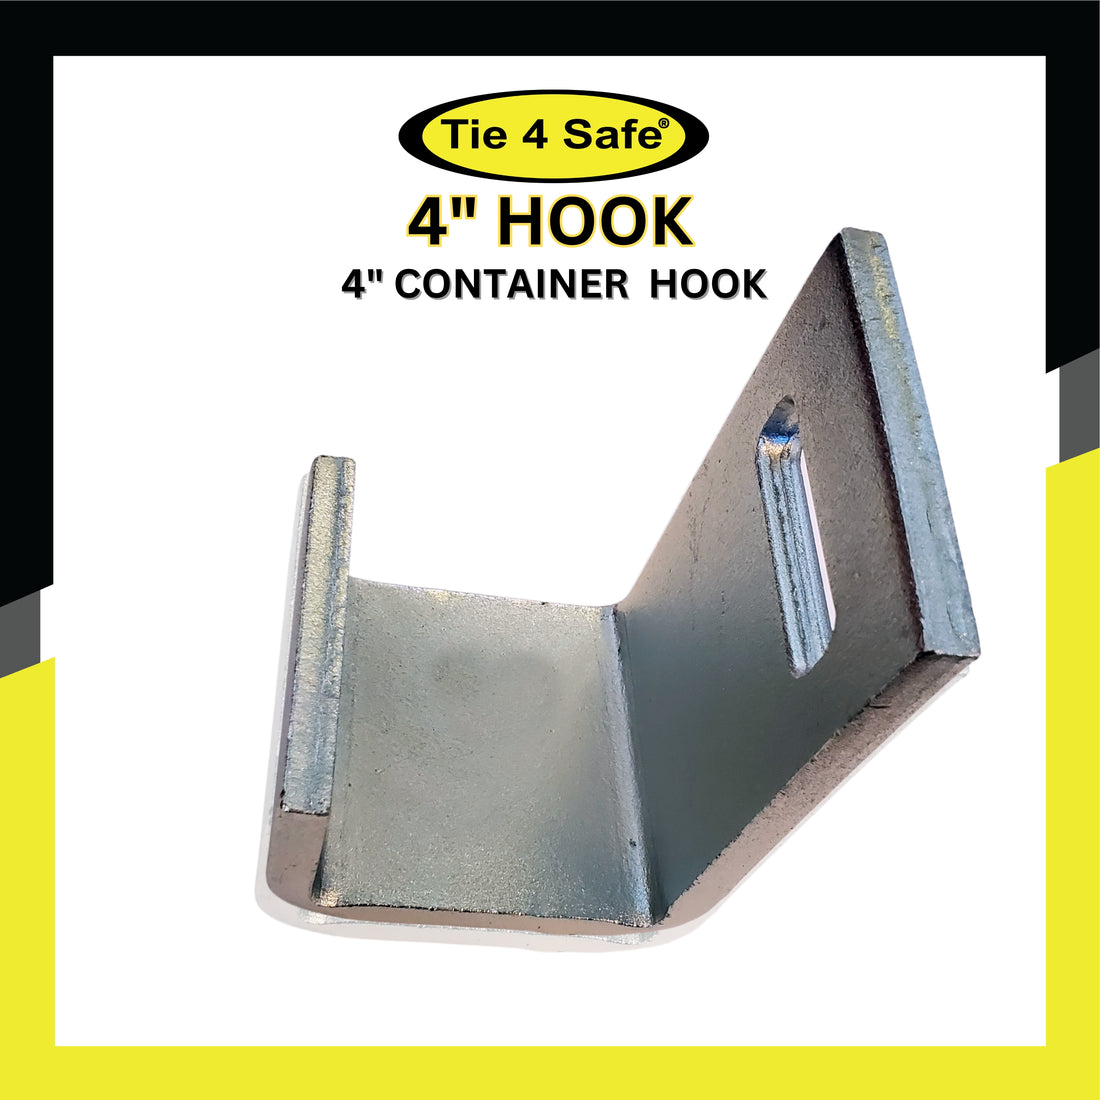 4" Container Hook